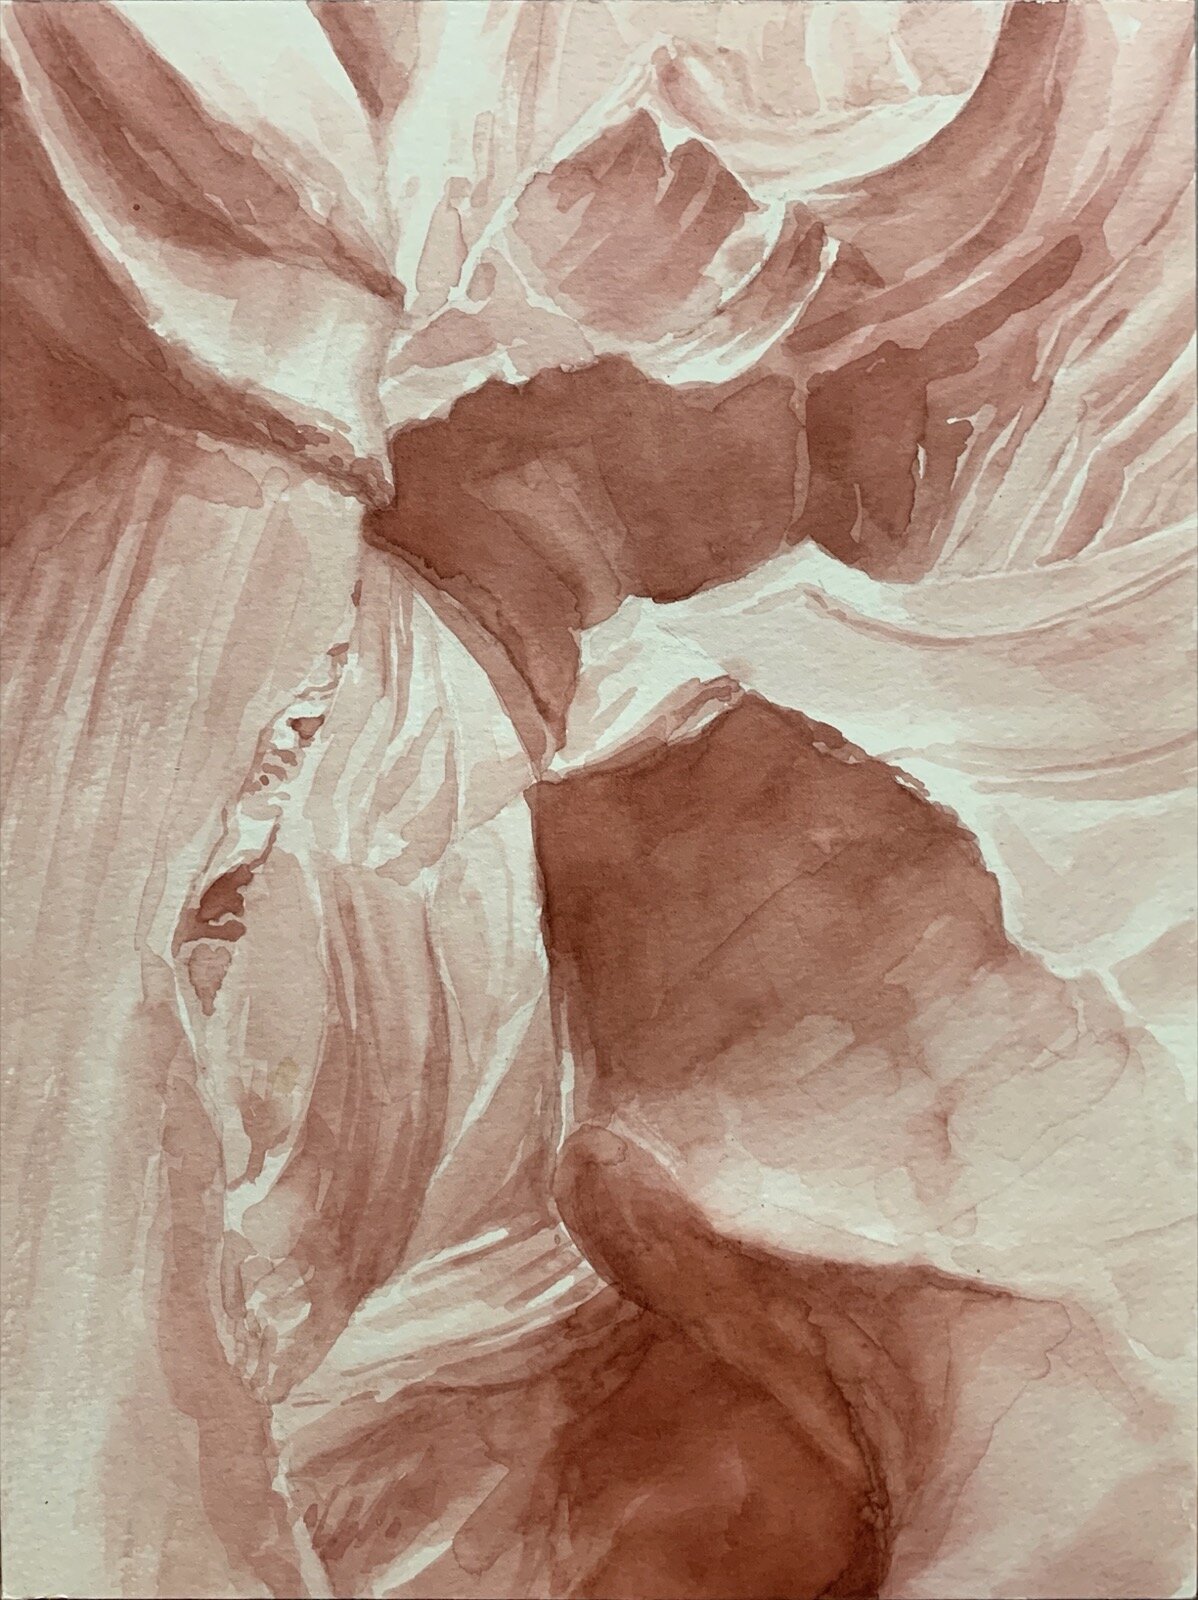   Antelope Canyon,  2020 avocado ink on paper, 12 x 9 in 